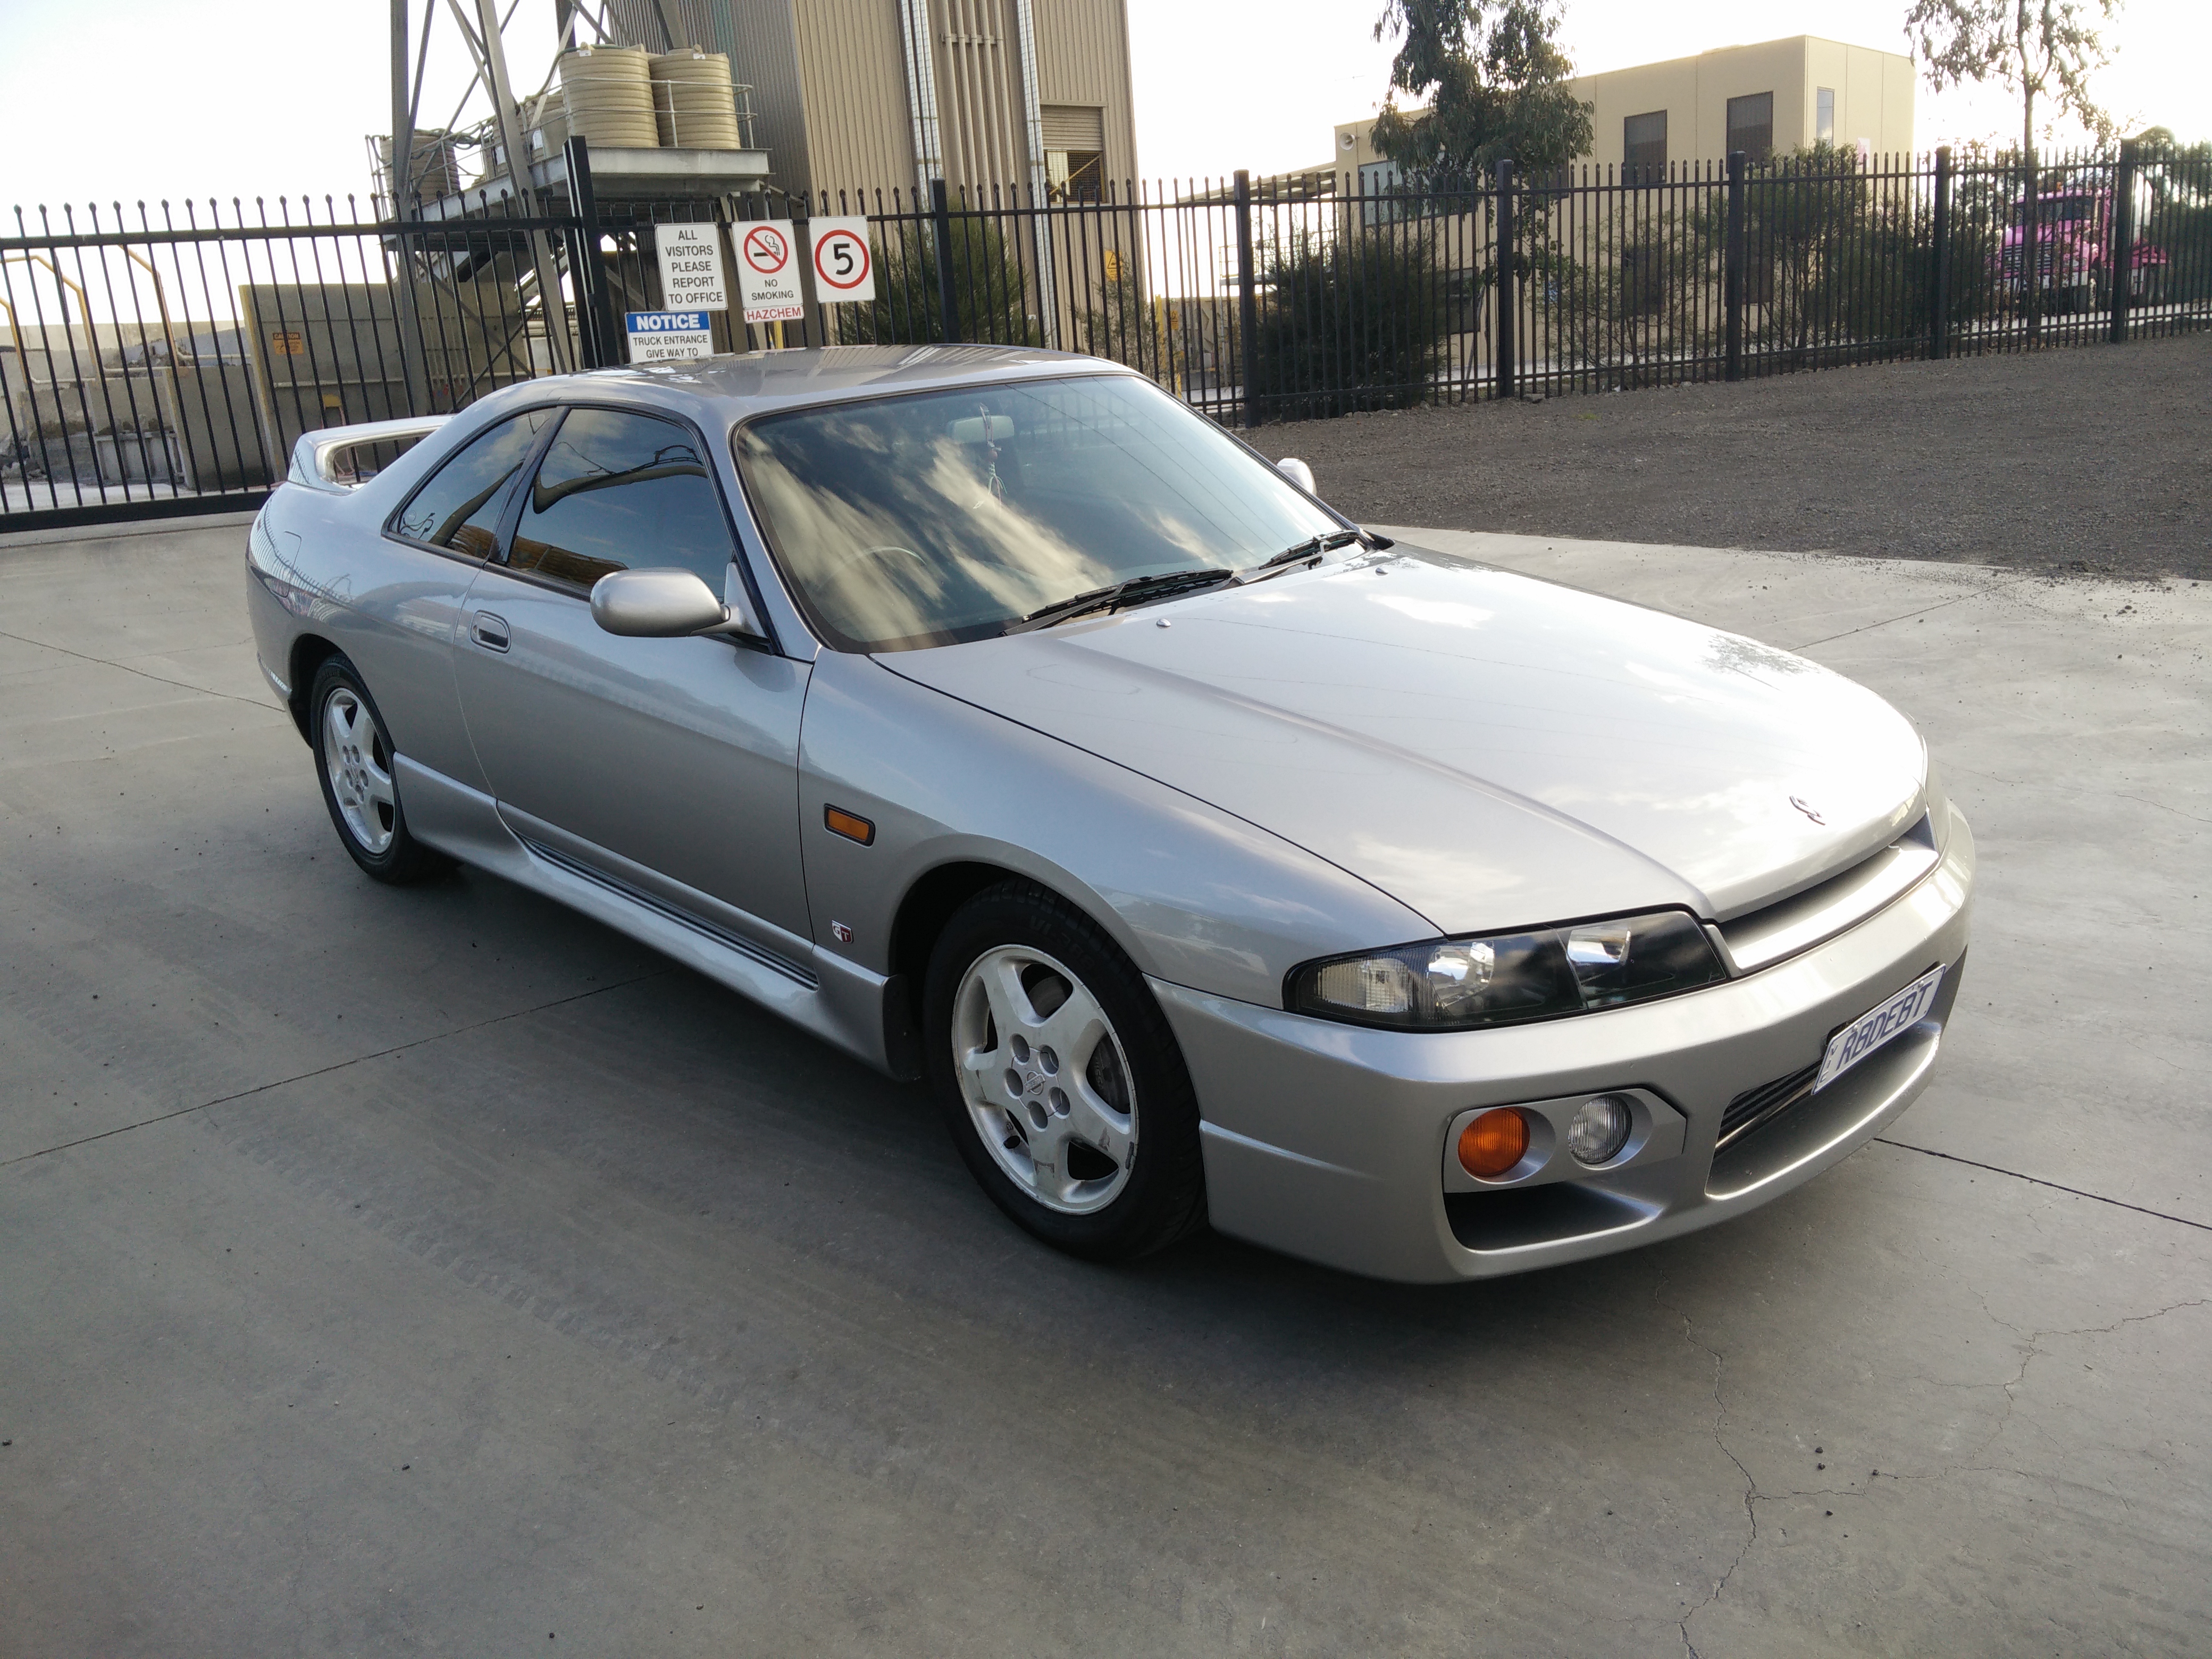 Sold 1996 R33 Gts T Series 2 Type M For Sale Private Whole Cars Only Sau Community